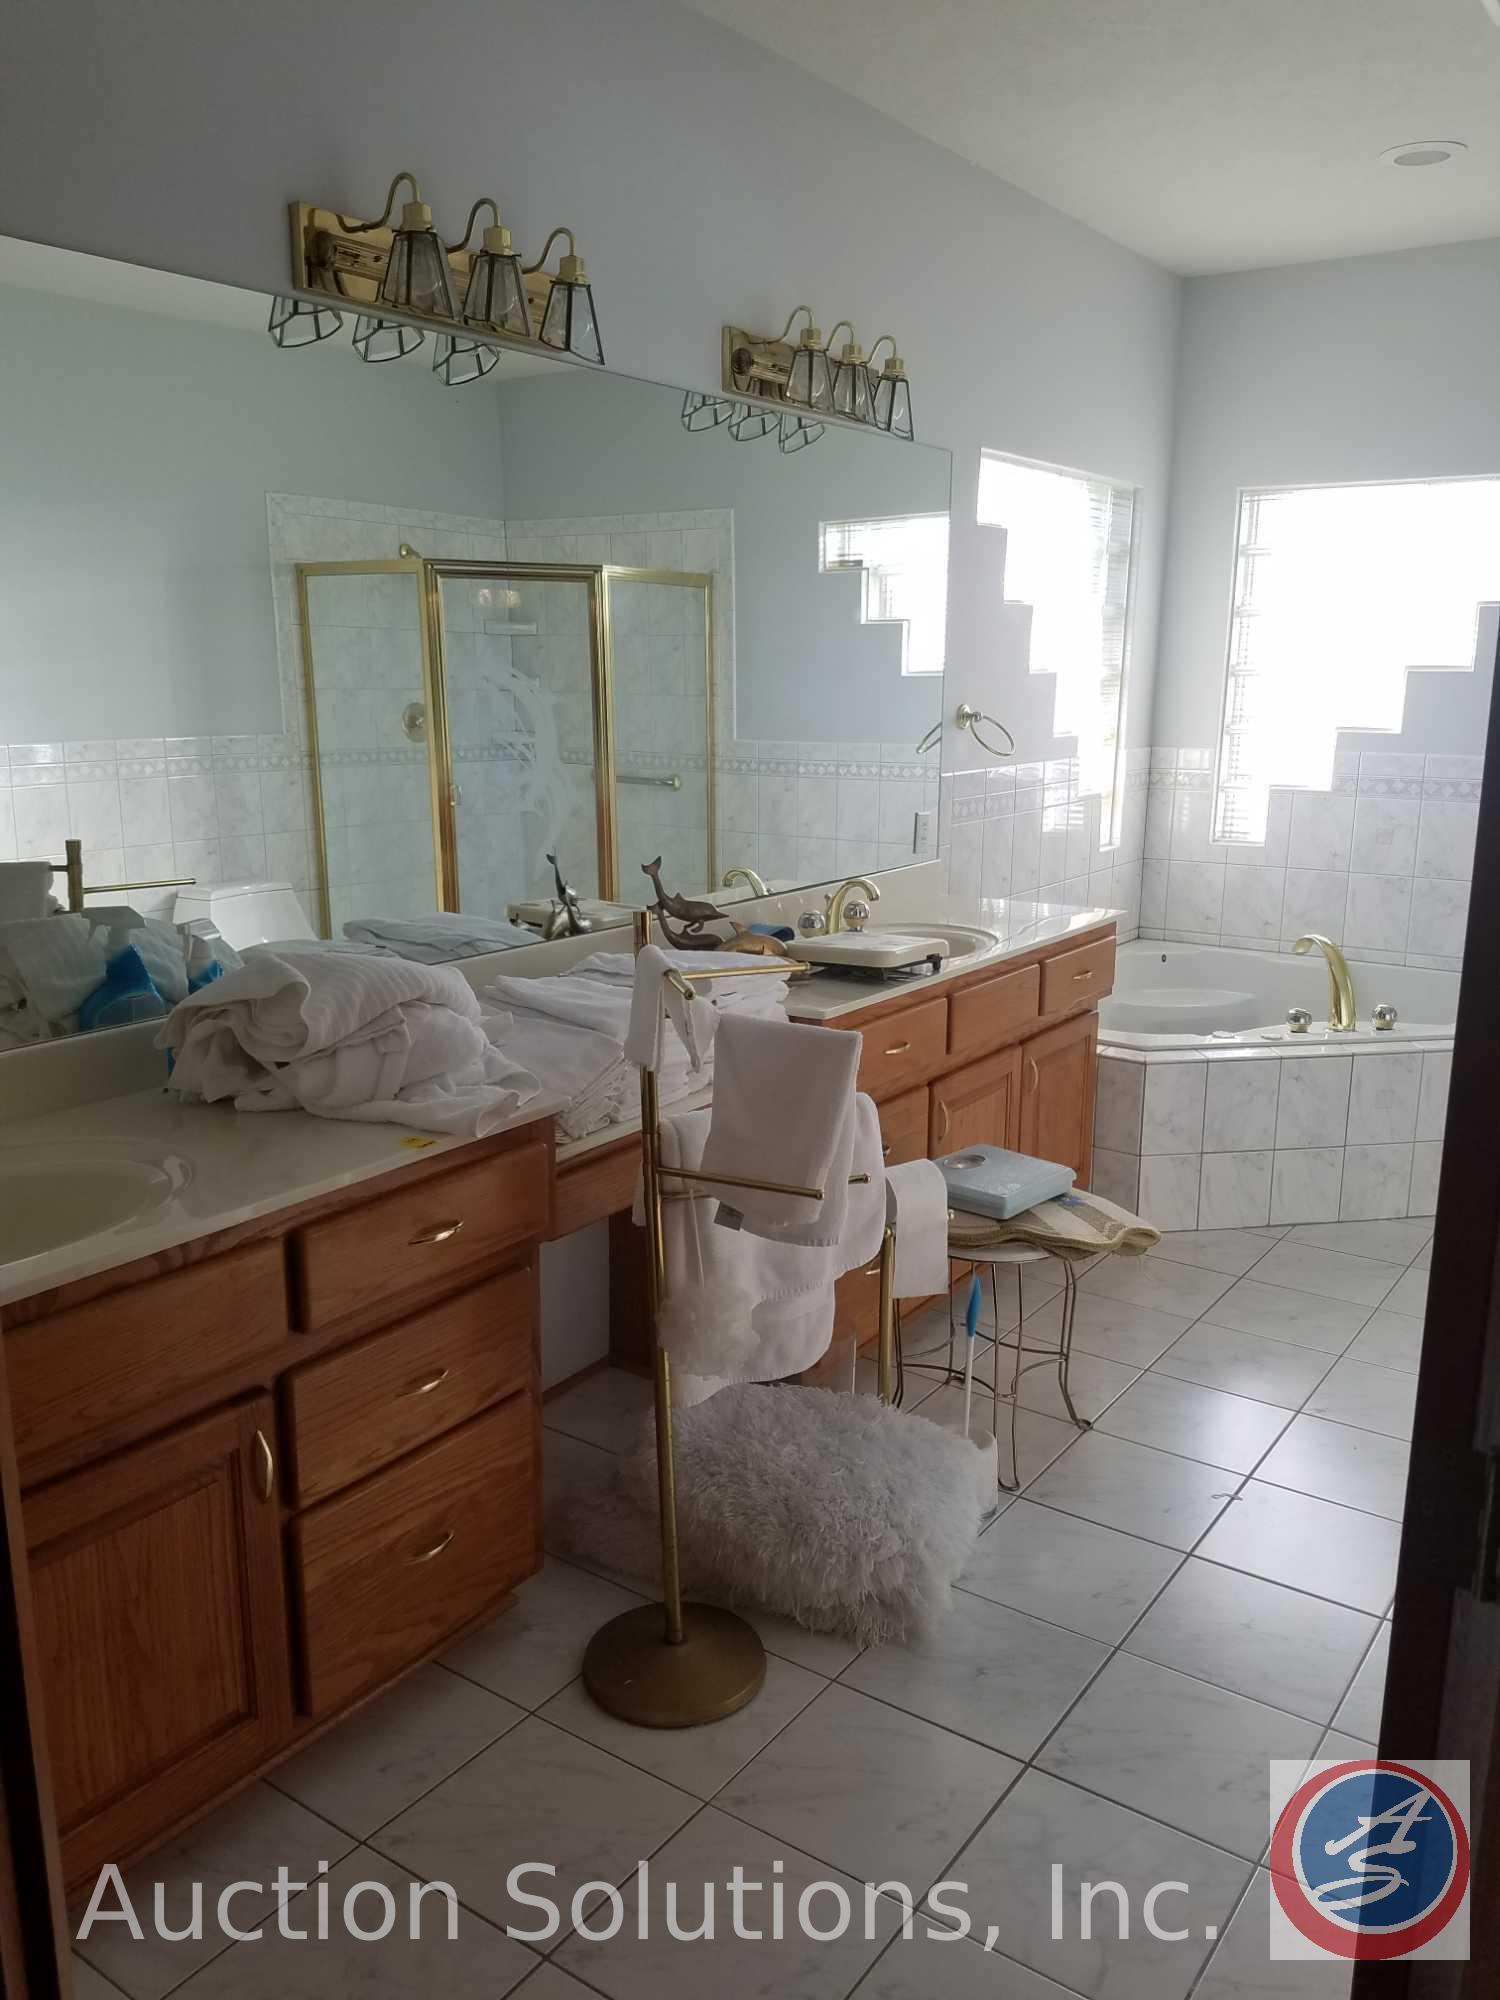 Salvage rights to the Master Bathroom including; Cabinets, Counters, Sink, Mirror, Shower, Corner